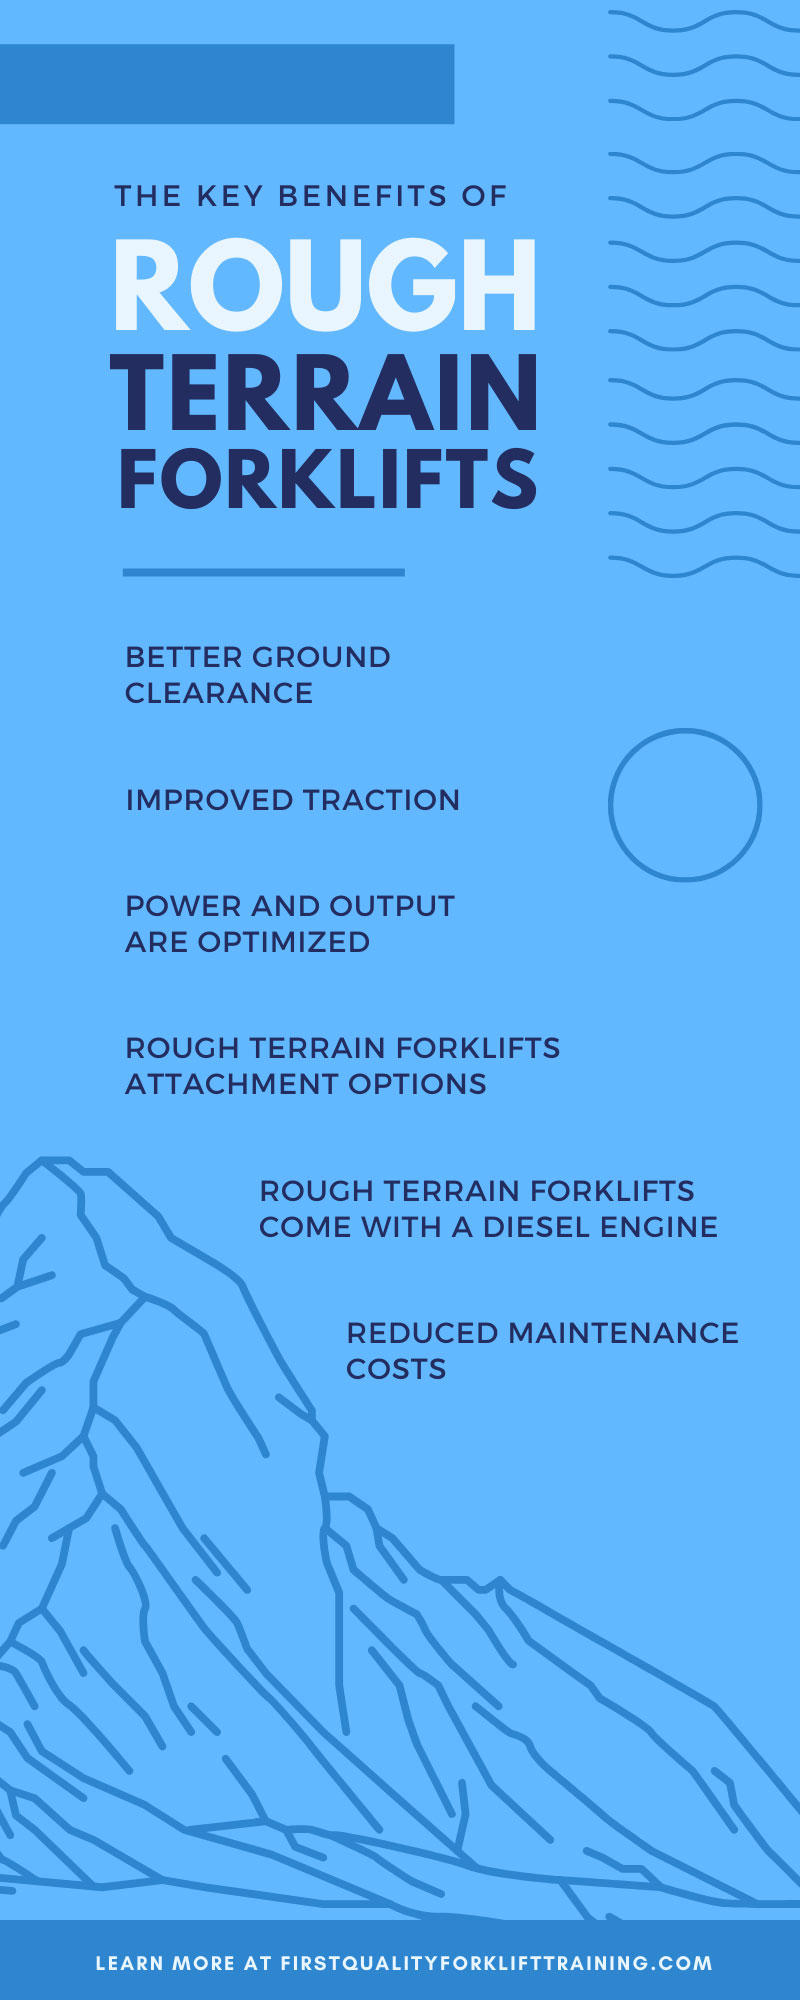 The Key Benefits of Rough Terrain Forklifts